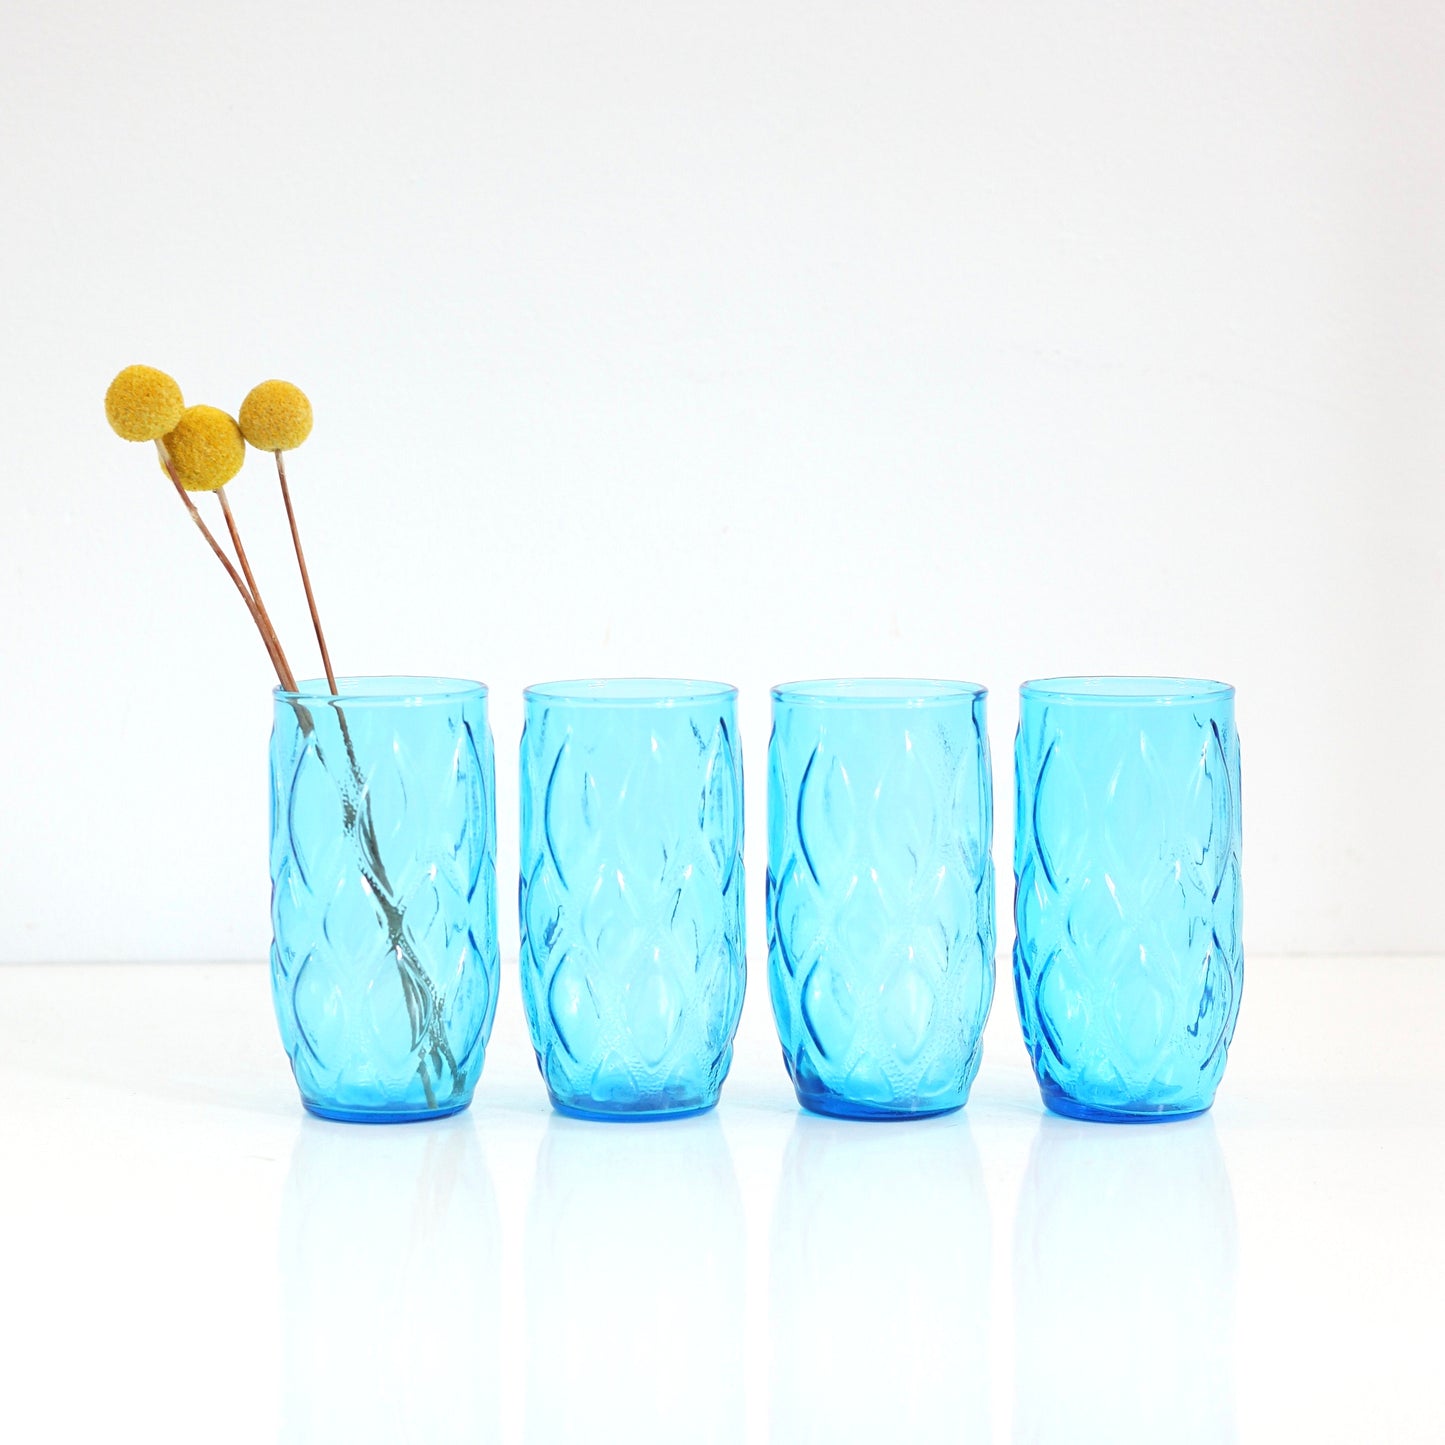 SOLD - Mid Century Tall Turquoise Madrid Tumblers by Anchor Hocking